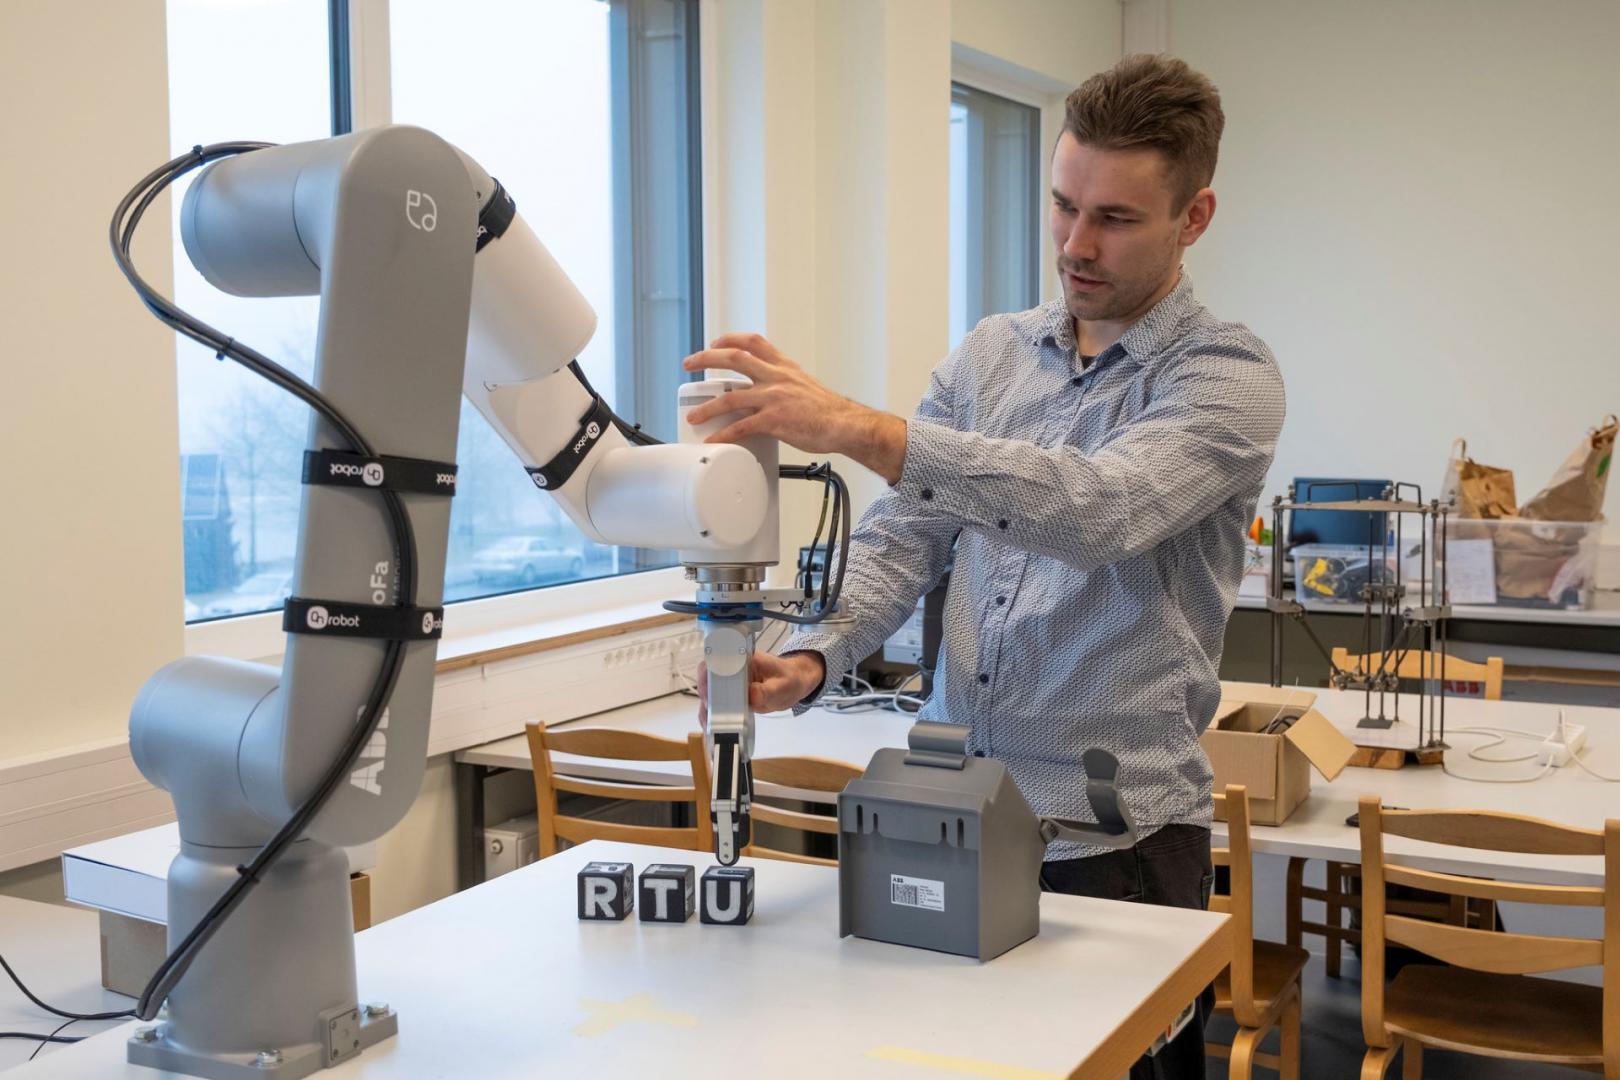 RTU Adds a Collaborative Robot or Cobot to Its Study Facilities